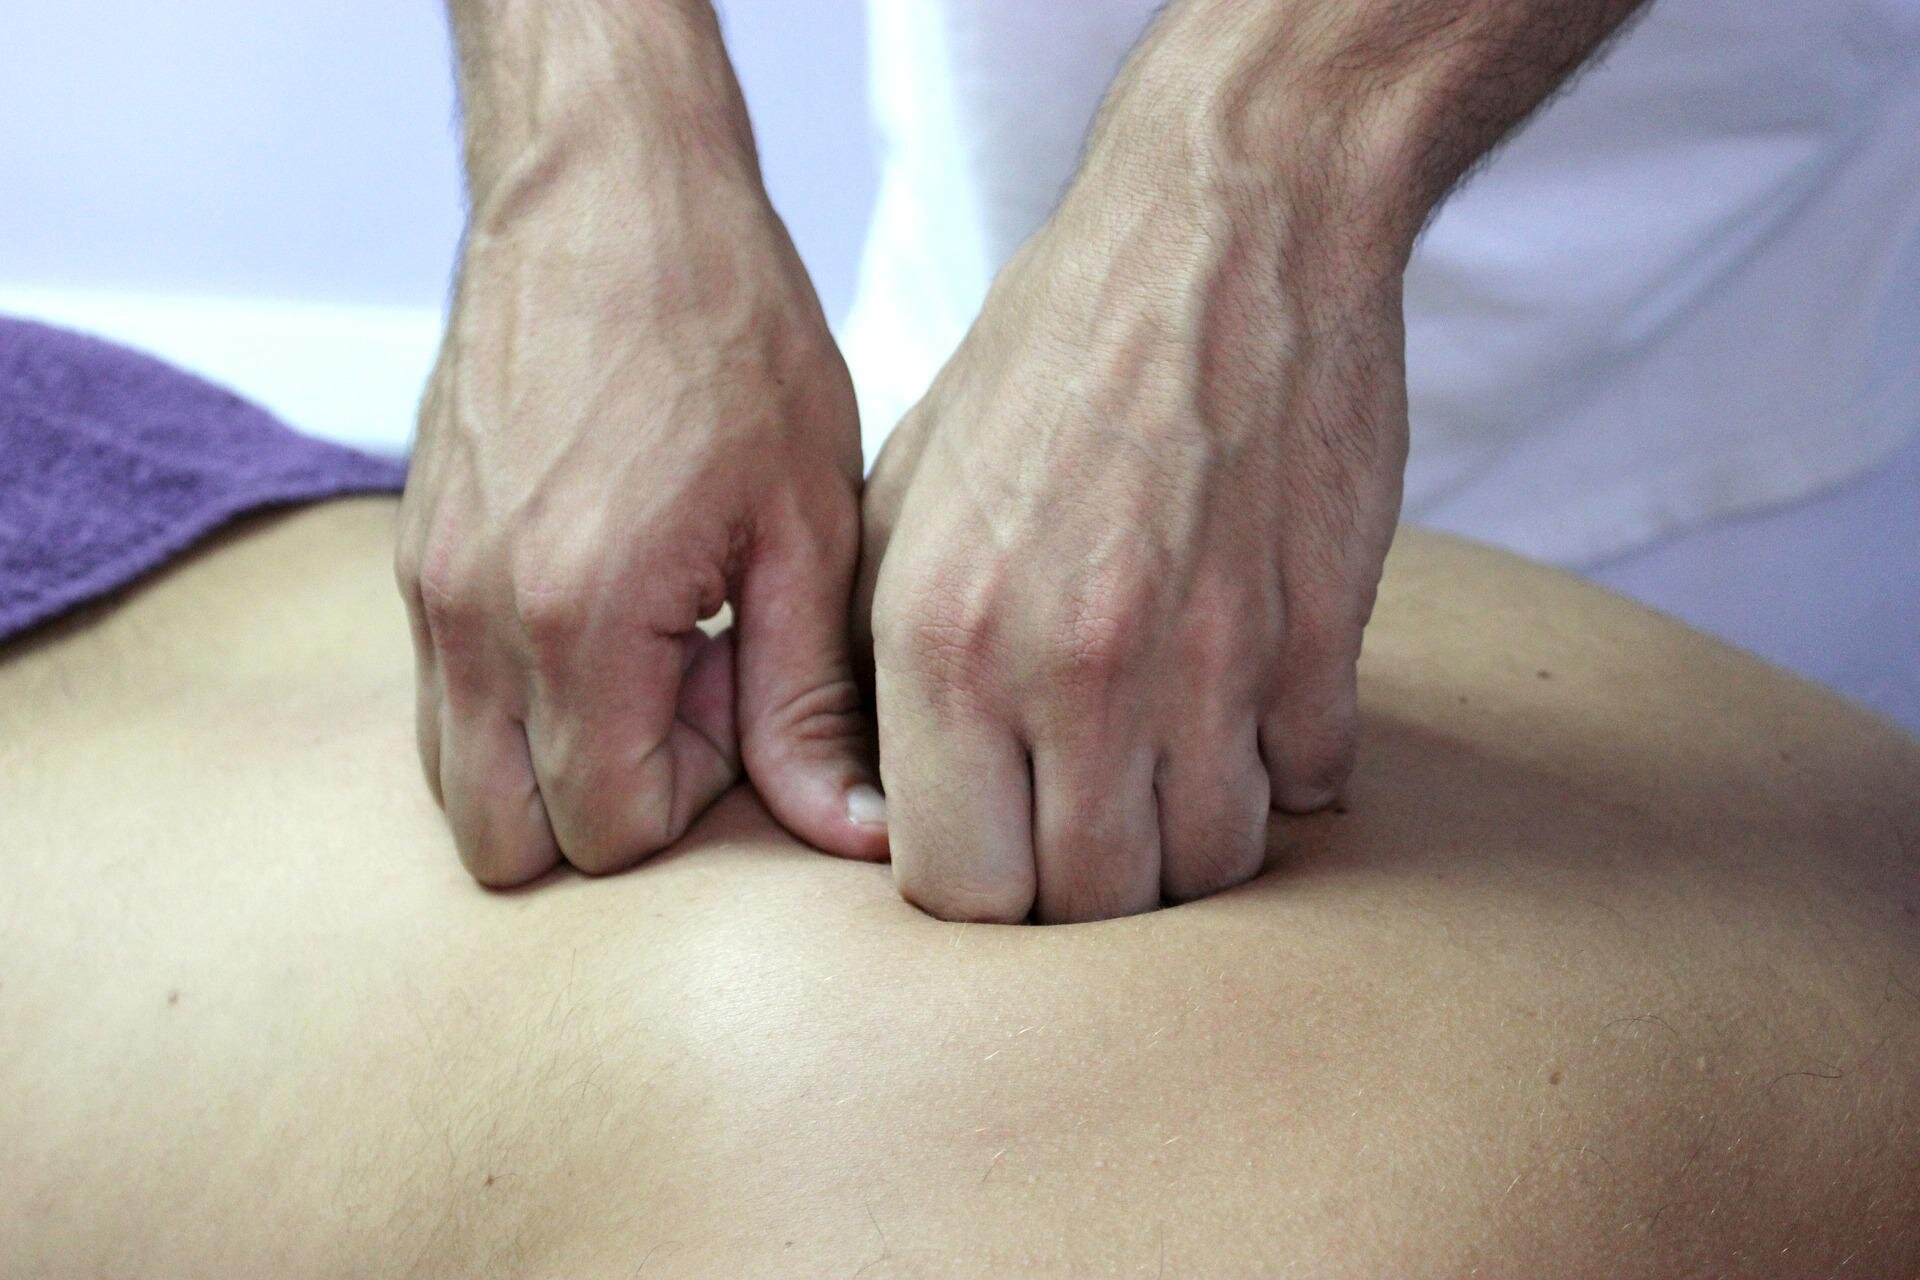 #’Promising evidence’ that osteopathy may relieve musculoskeletal pain